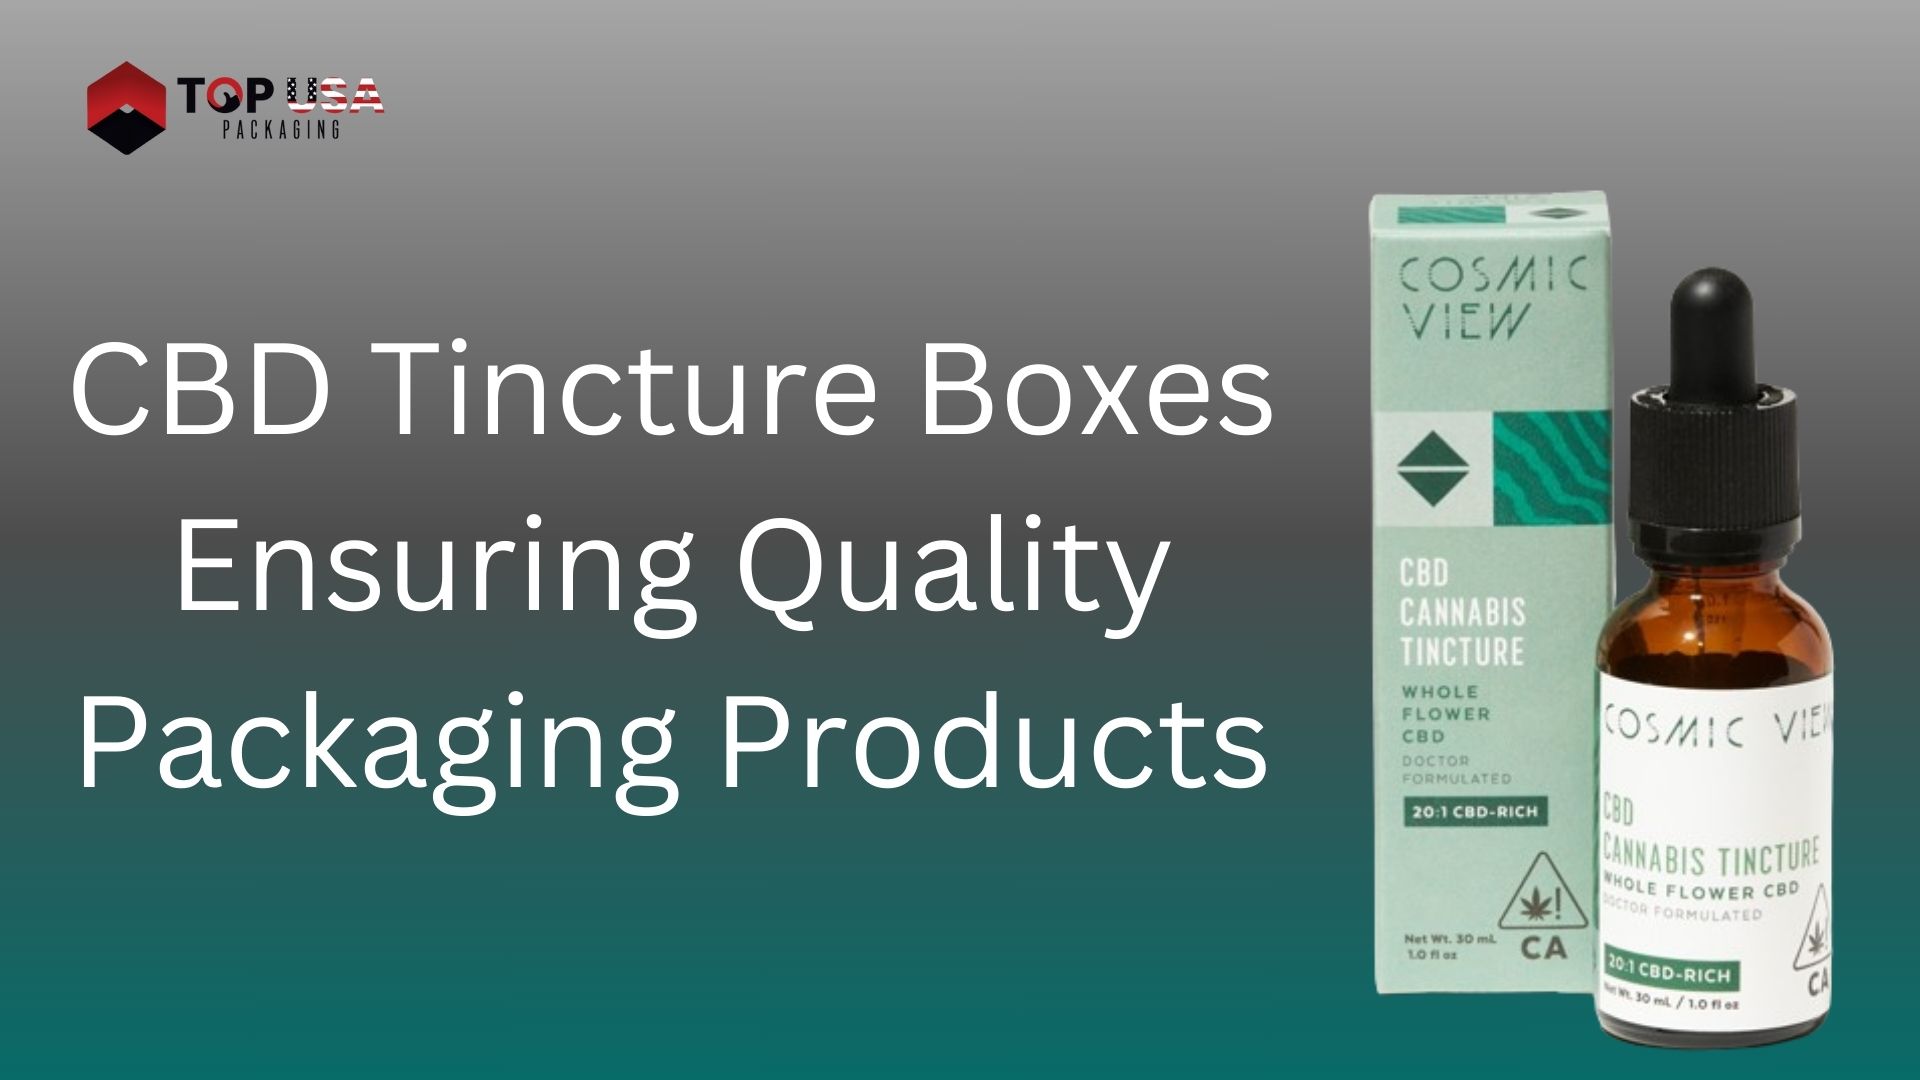 CBD Tincture Boxes Ensuring Quality Packaging Products